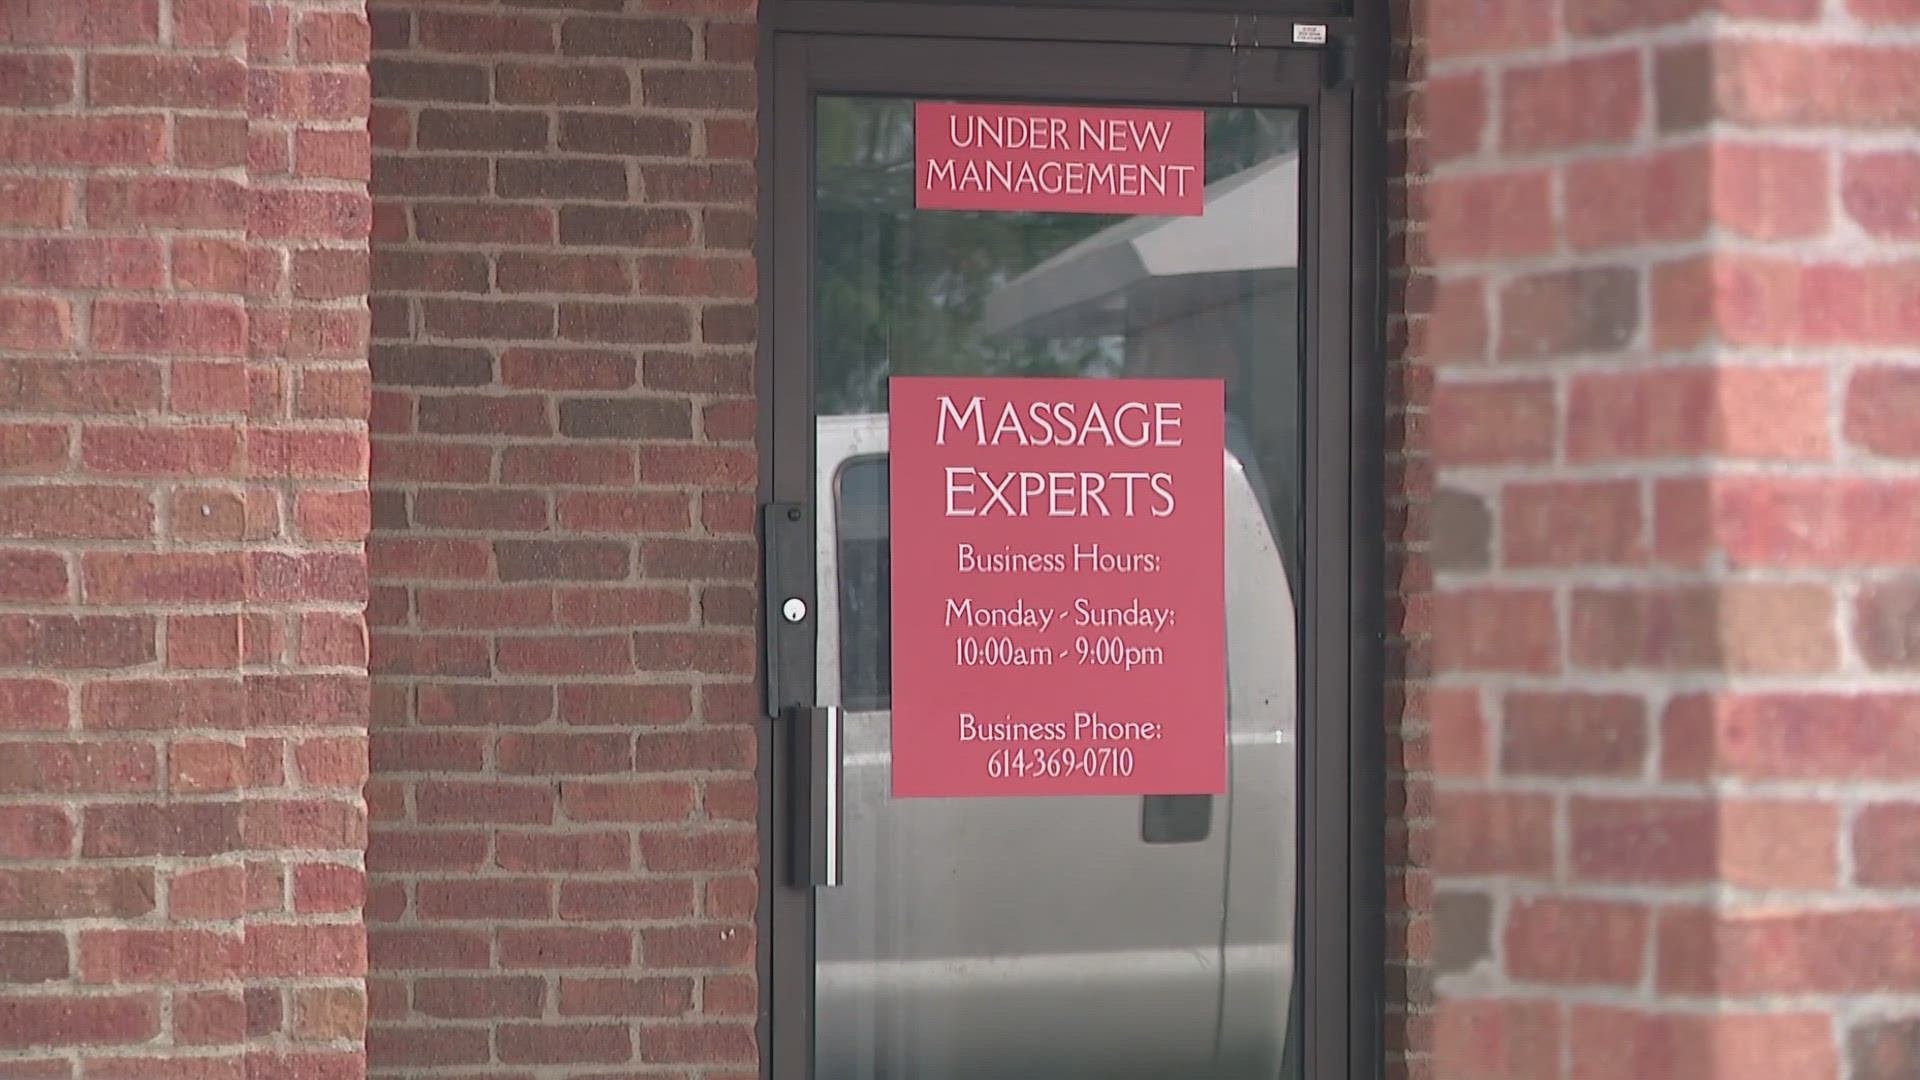 Law enforcement officials are investigating a Pickerington massage parlor suspected of acting as a front for human trafficking, prostitution and money laundering.